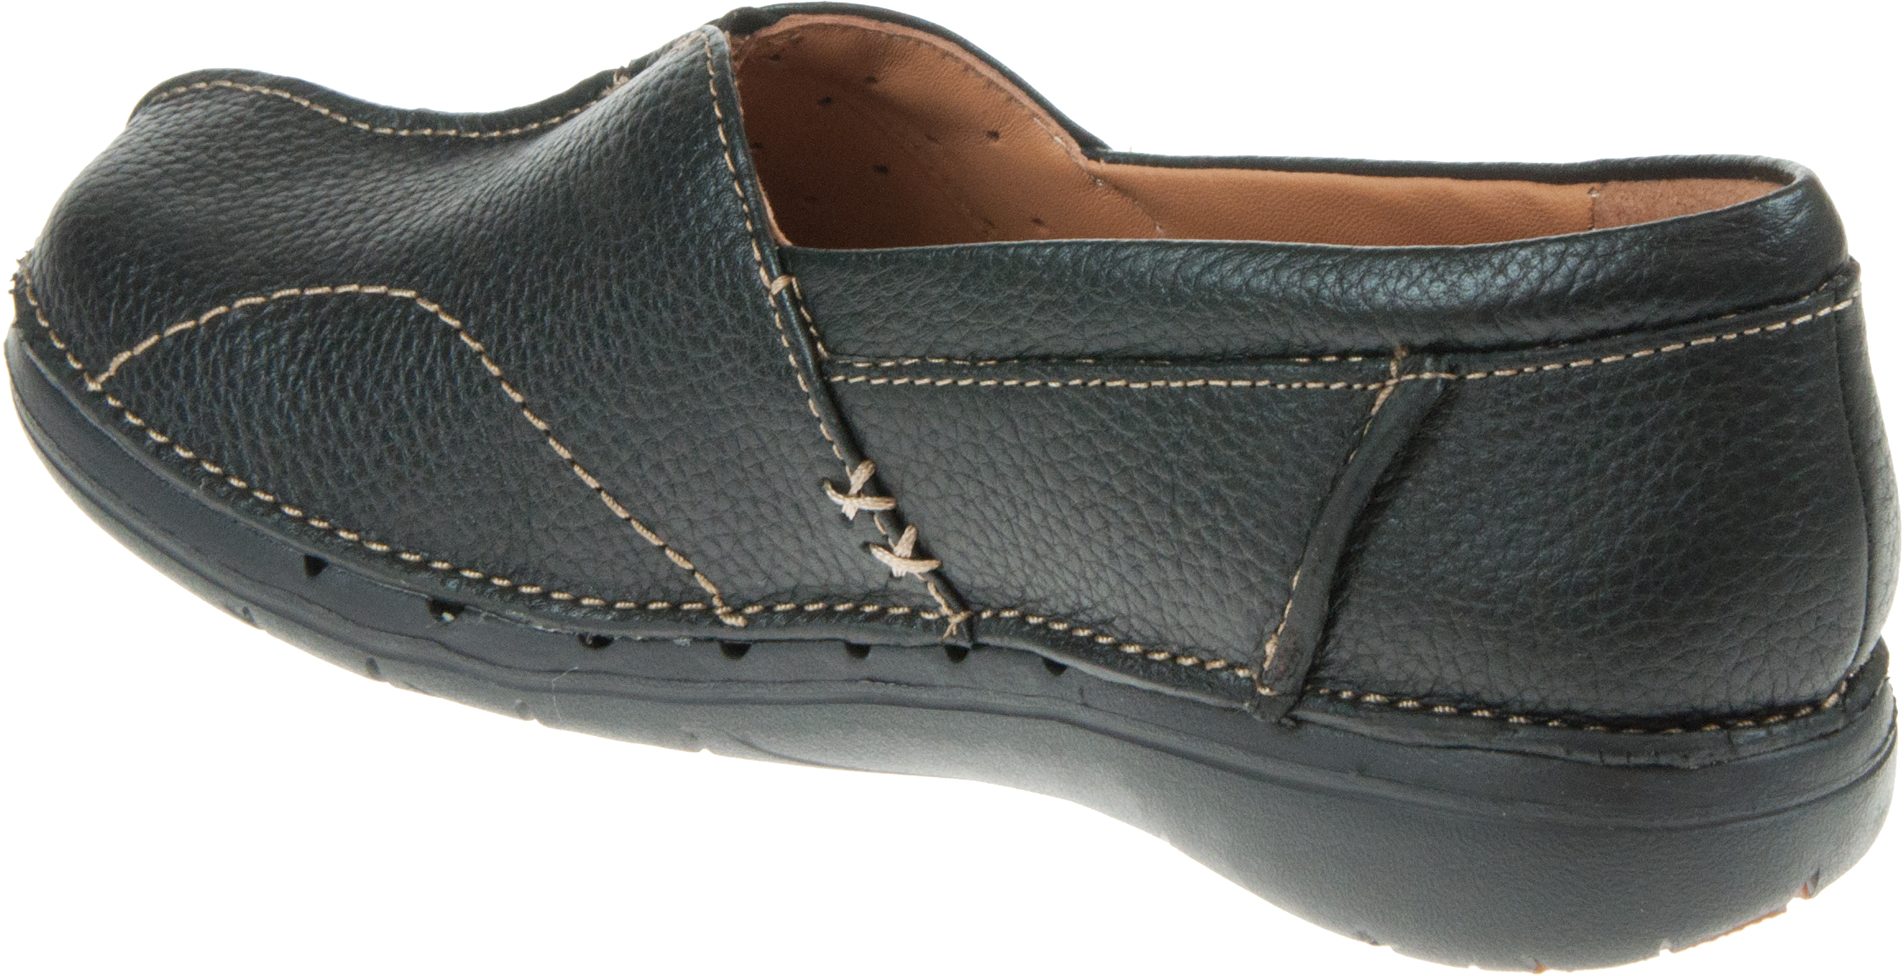 Clarks Un Loop Stride Black Leather 26168669 - Everyday Shoes ...